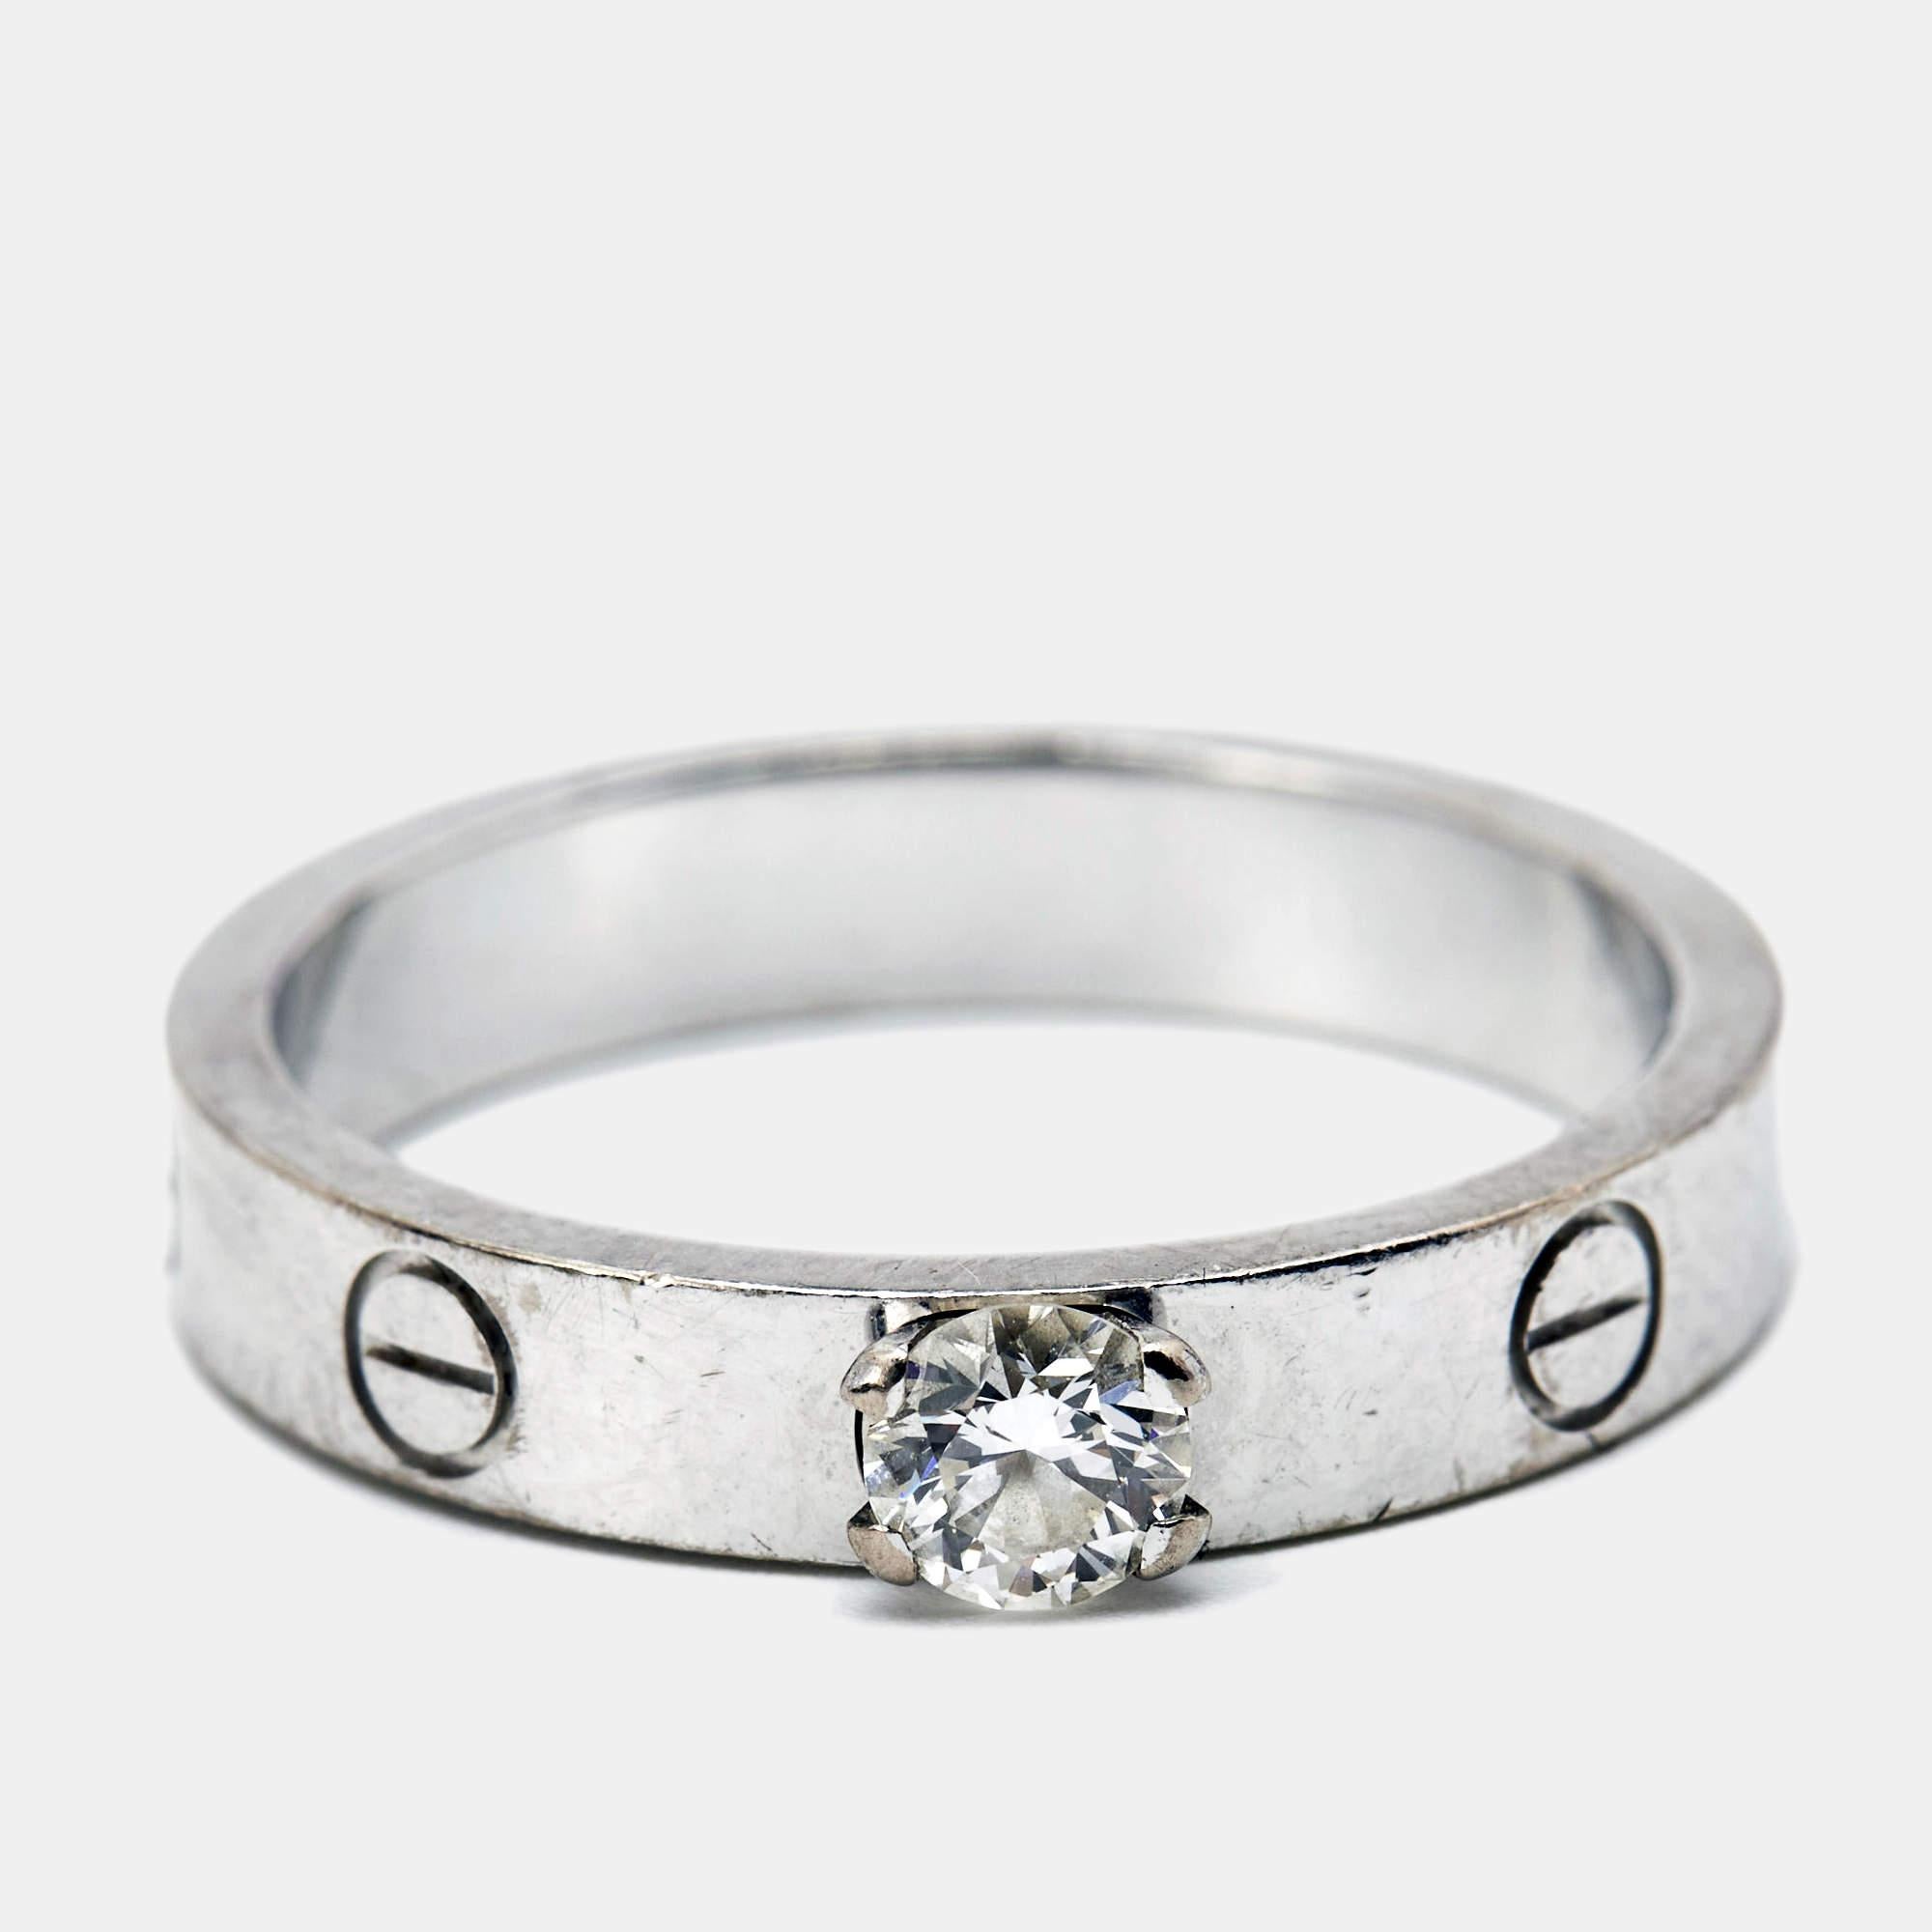 The fine workmanship, use of precious metals, and unique appeal make this fine jewelry ring a fabulous purchase. It's a worthy investment.
 
Includes: Original Case

